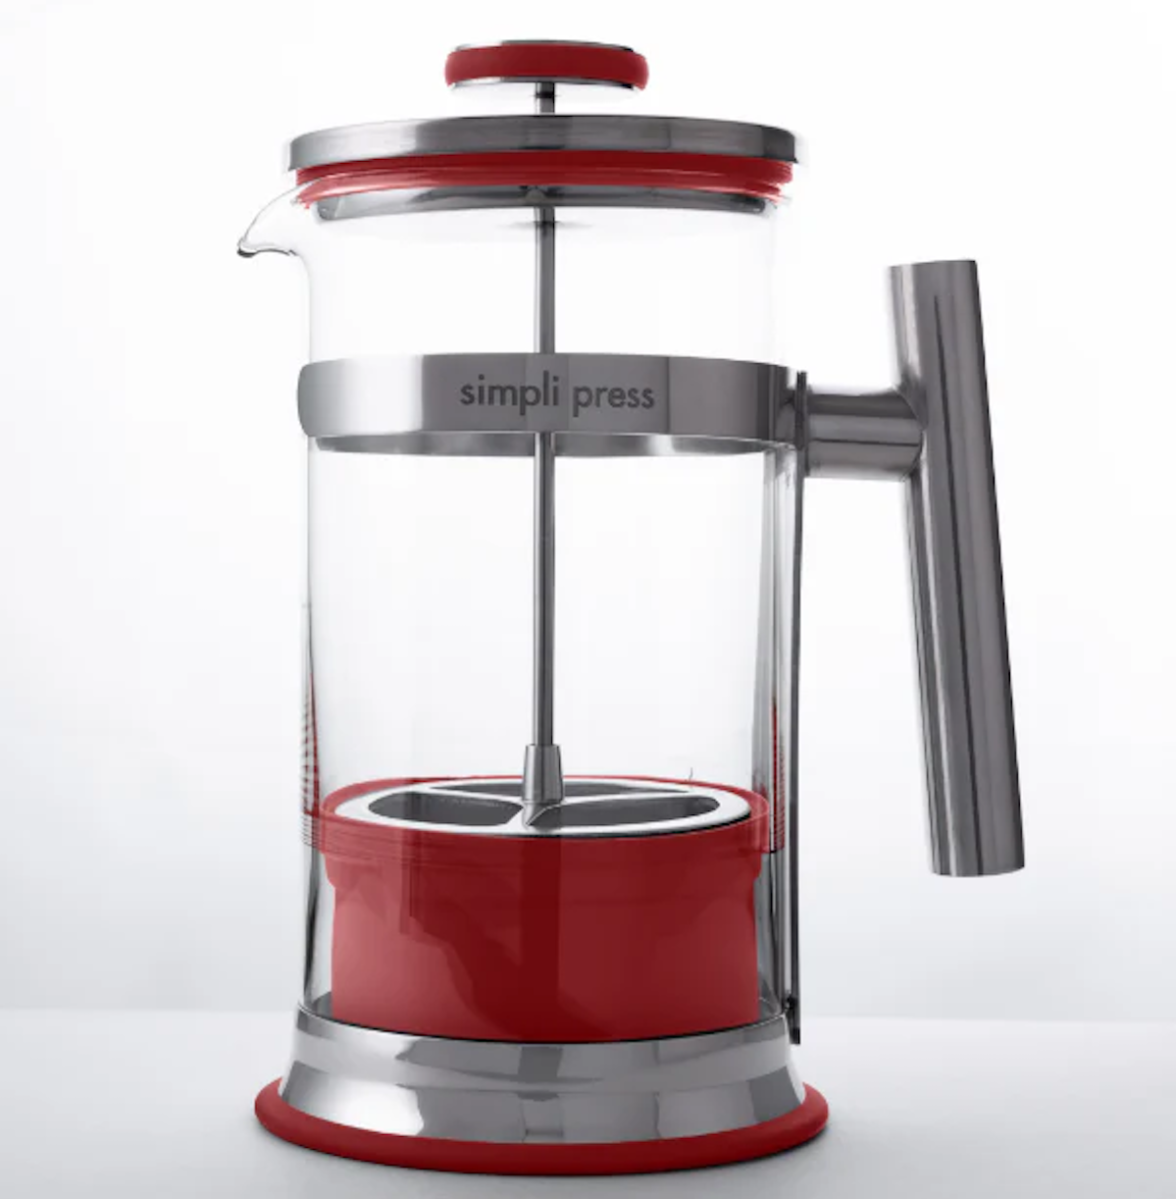 A red French press coffee maker sits in front of a white background.